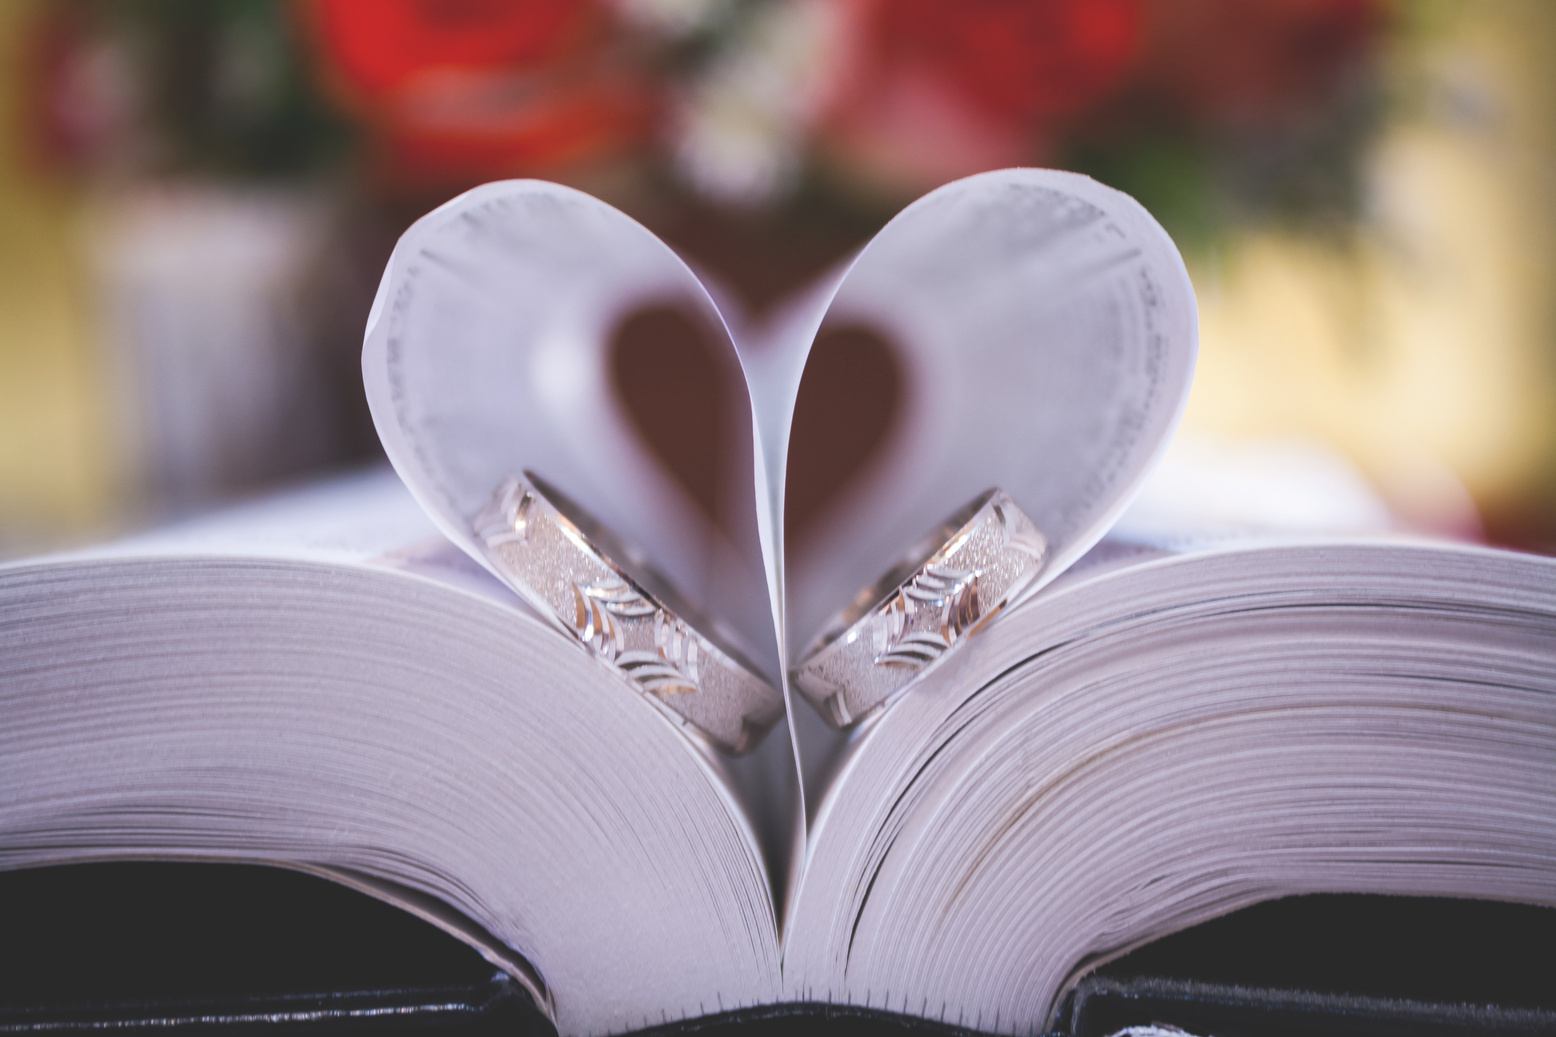 Wedding Rings on a Book